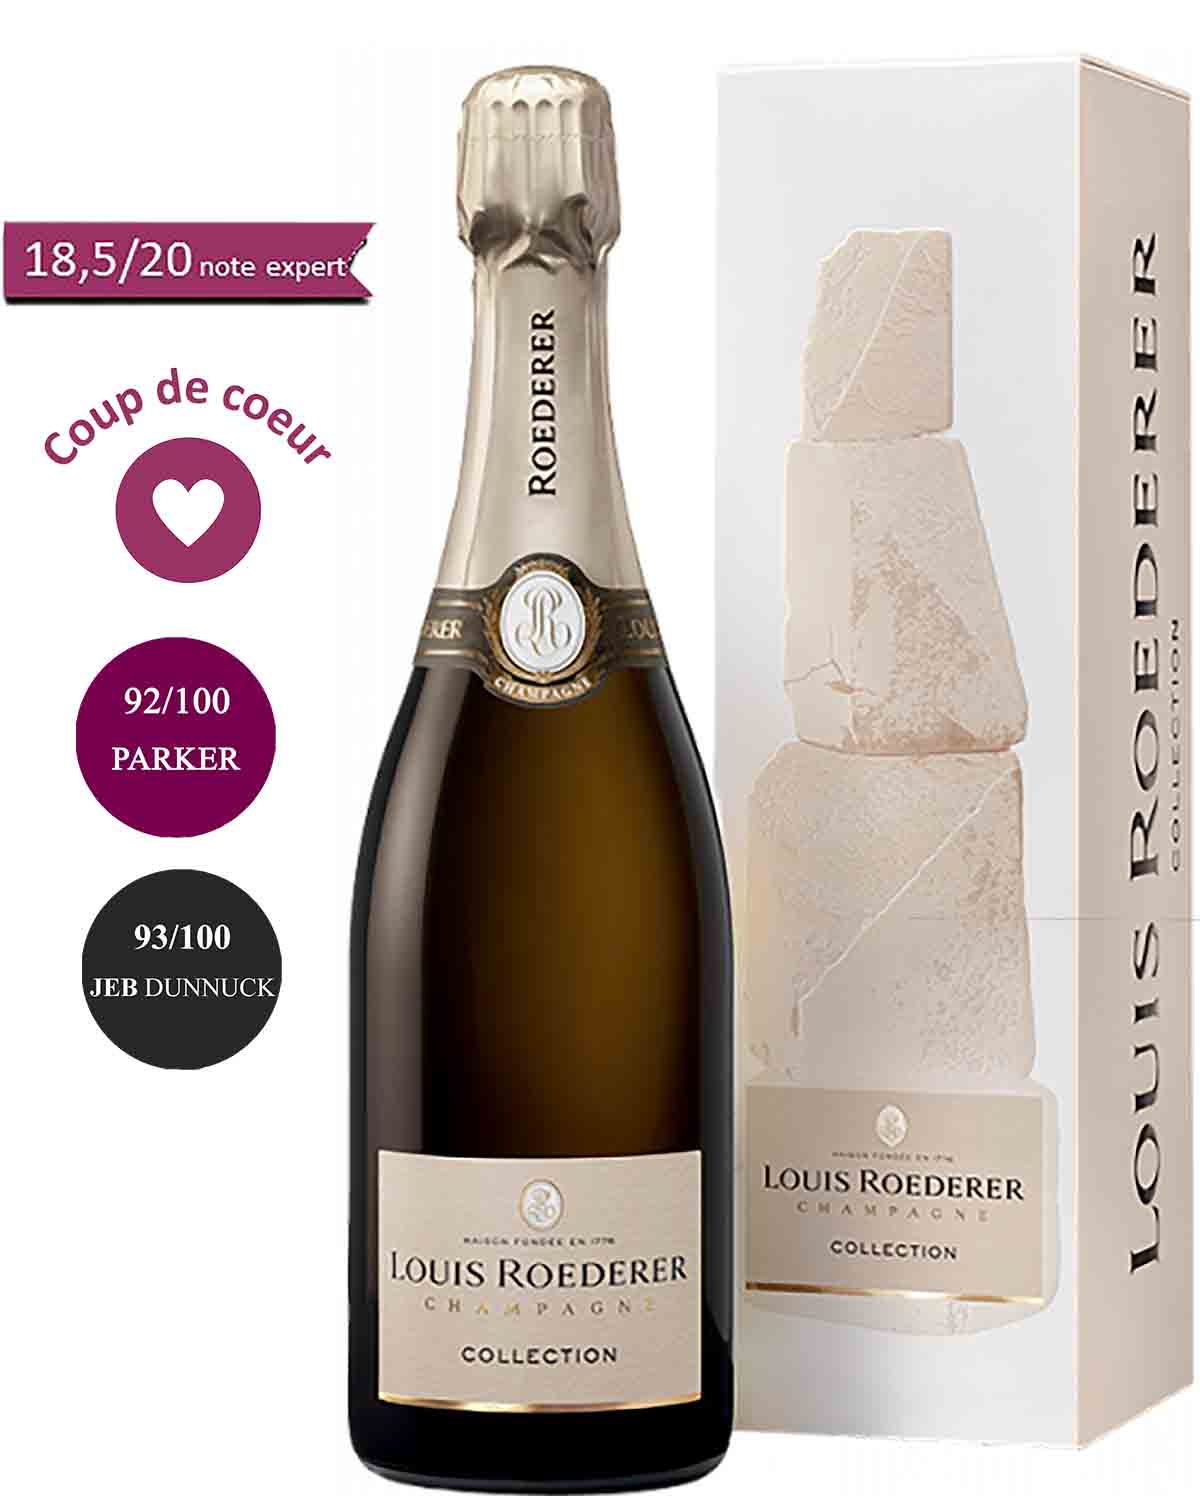 Champagne Collection 243 - Louis Roederer